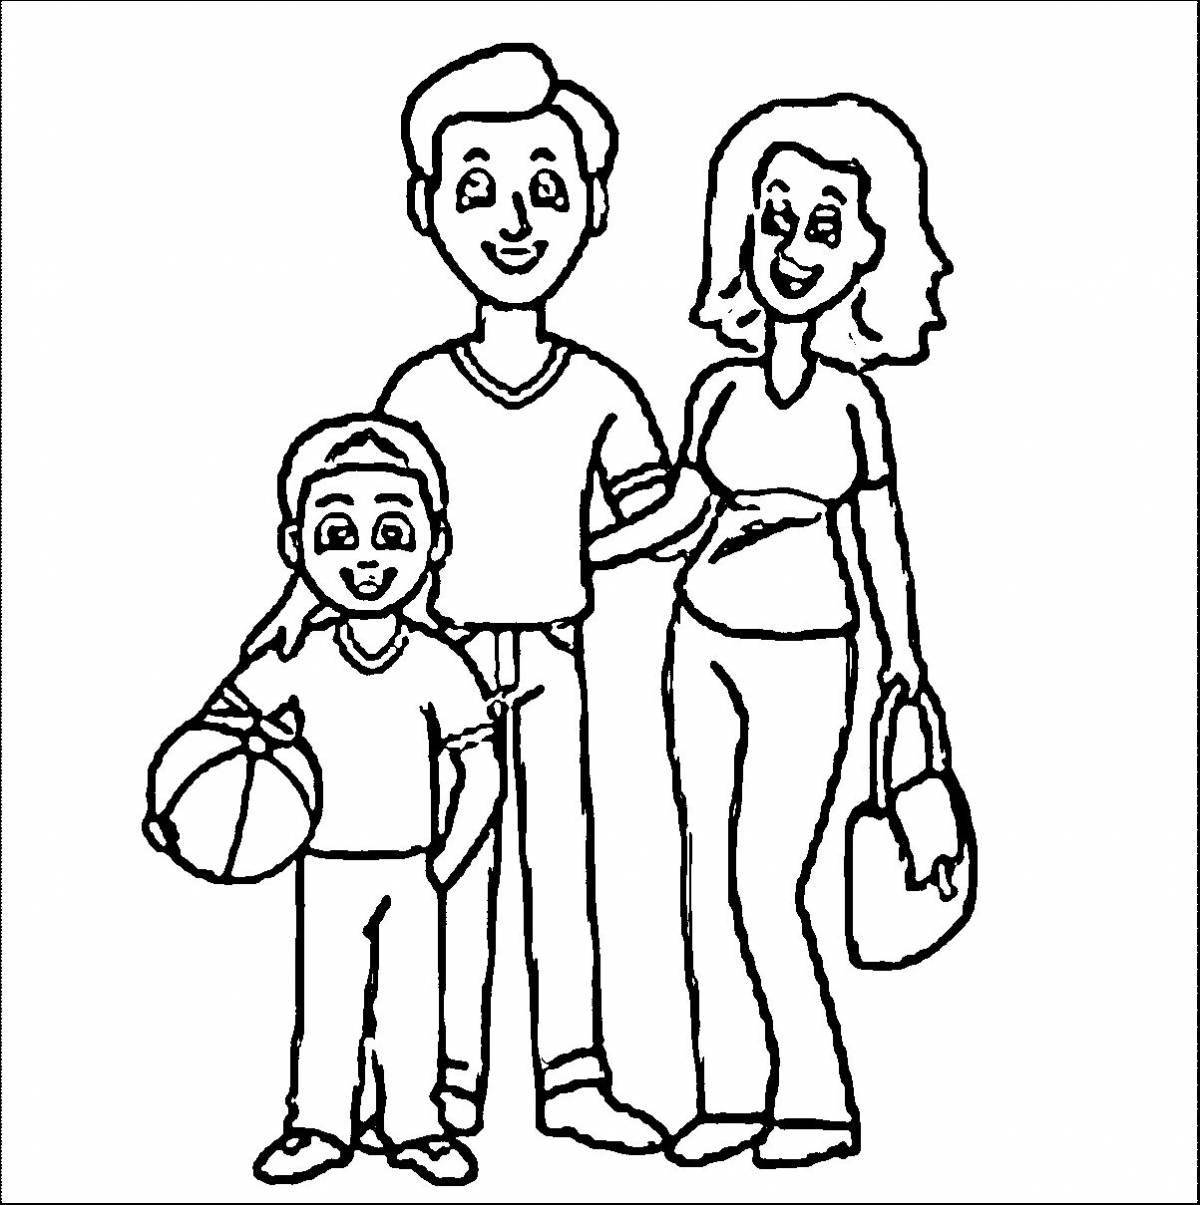 Loving mom and dad coloring book for kids